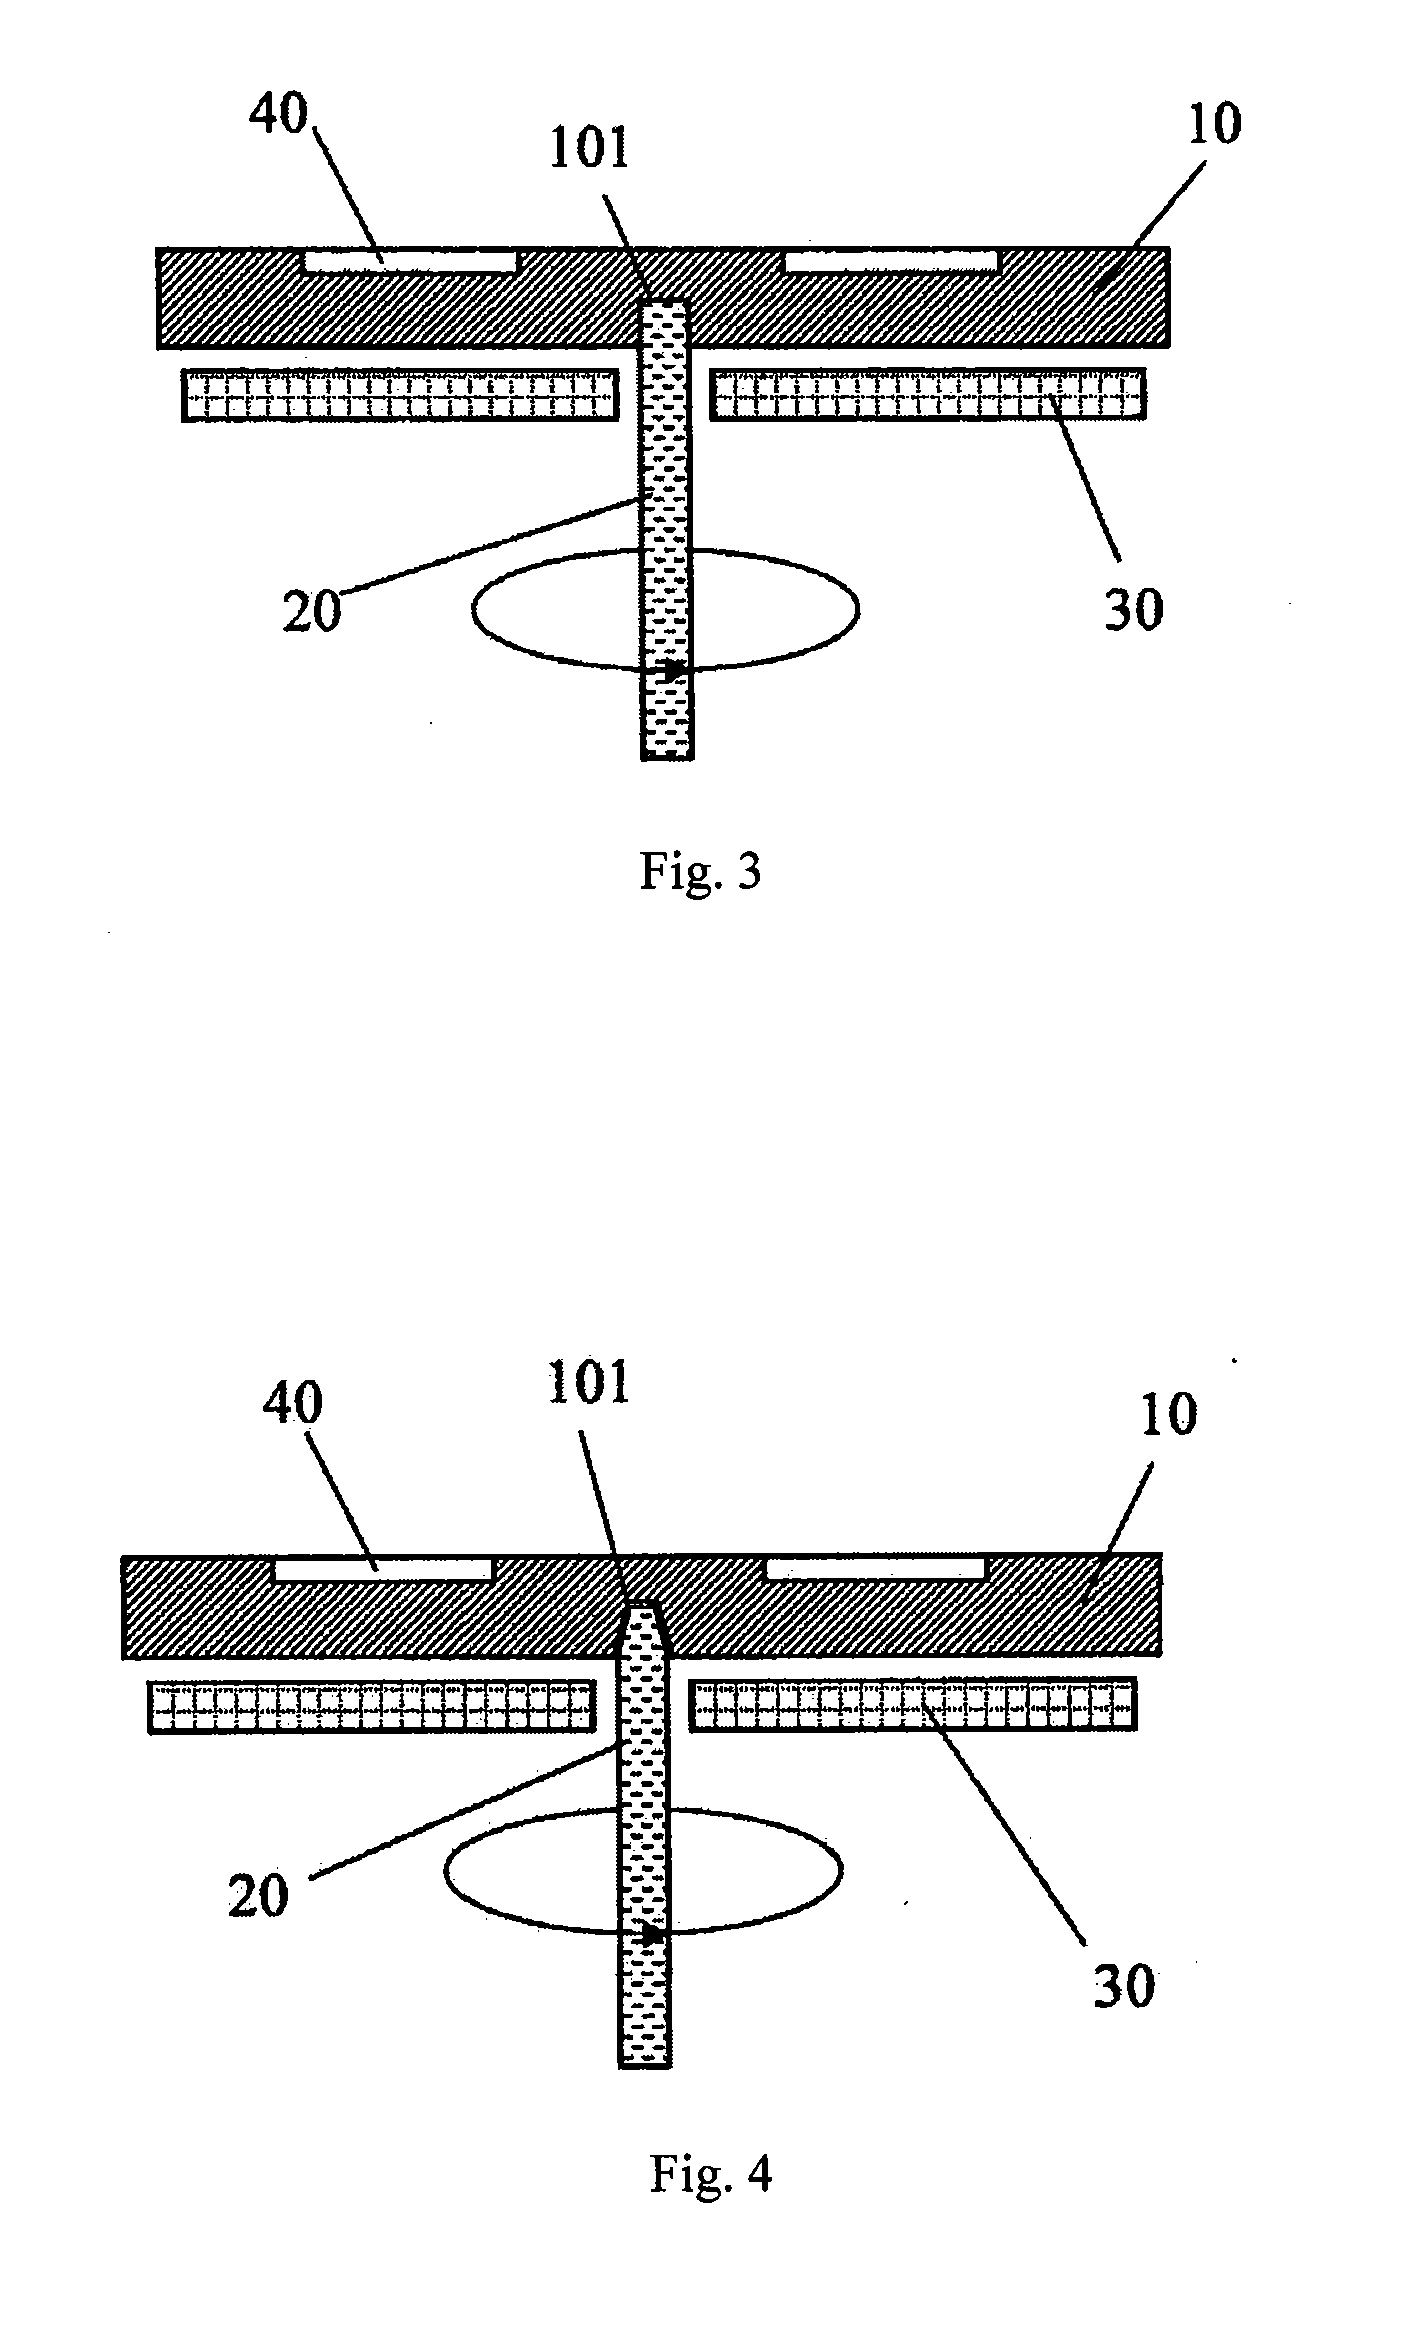 Epitaxial wafer susceptor and supportive and rotational connection apparatus matching the susceptor